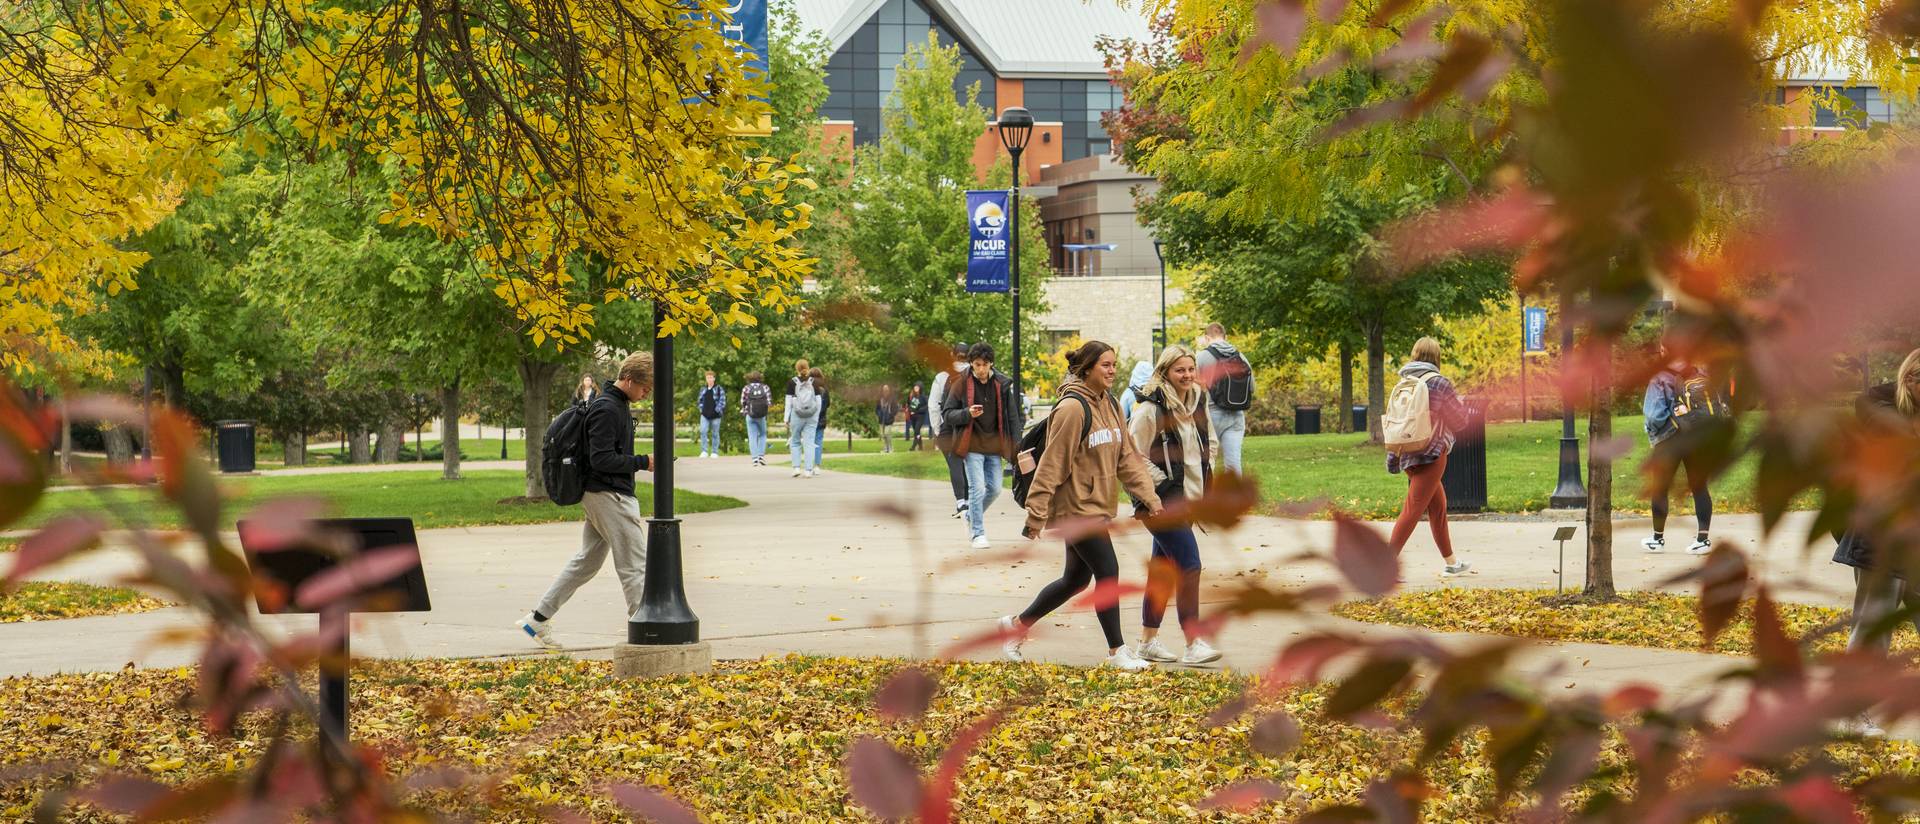 Students walking to class on a fall day, with trees changing to orange and leaves on the ground